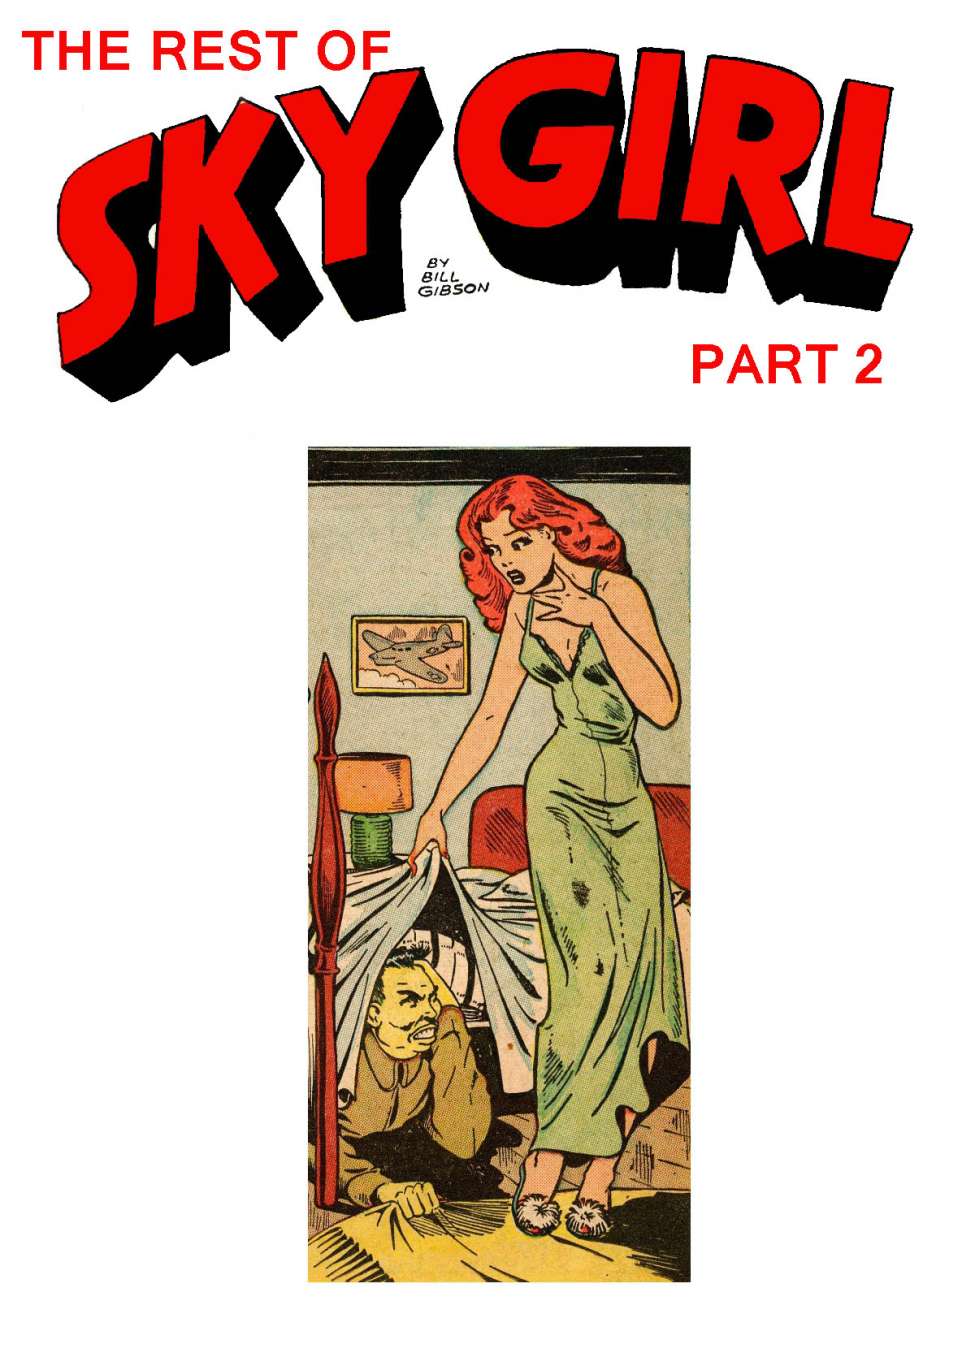 Book Cover For Sky Girl Collection, The Rest of Part 2